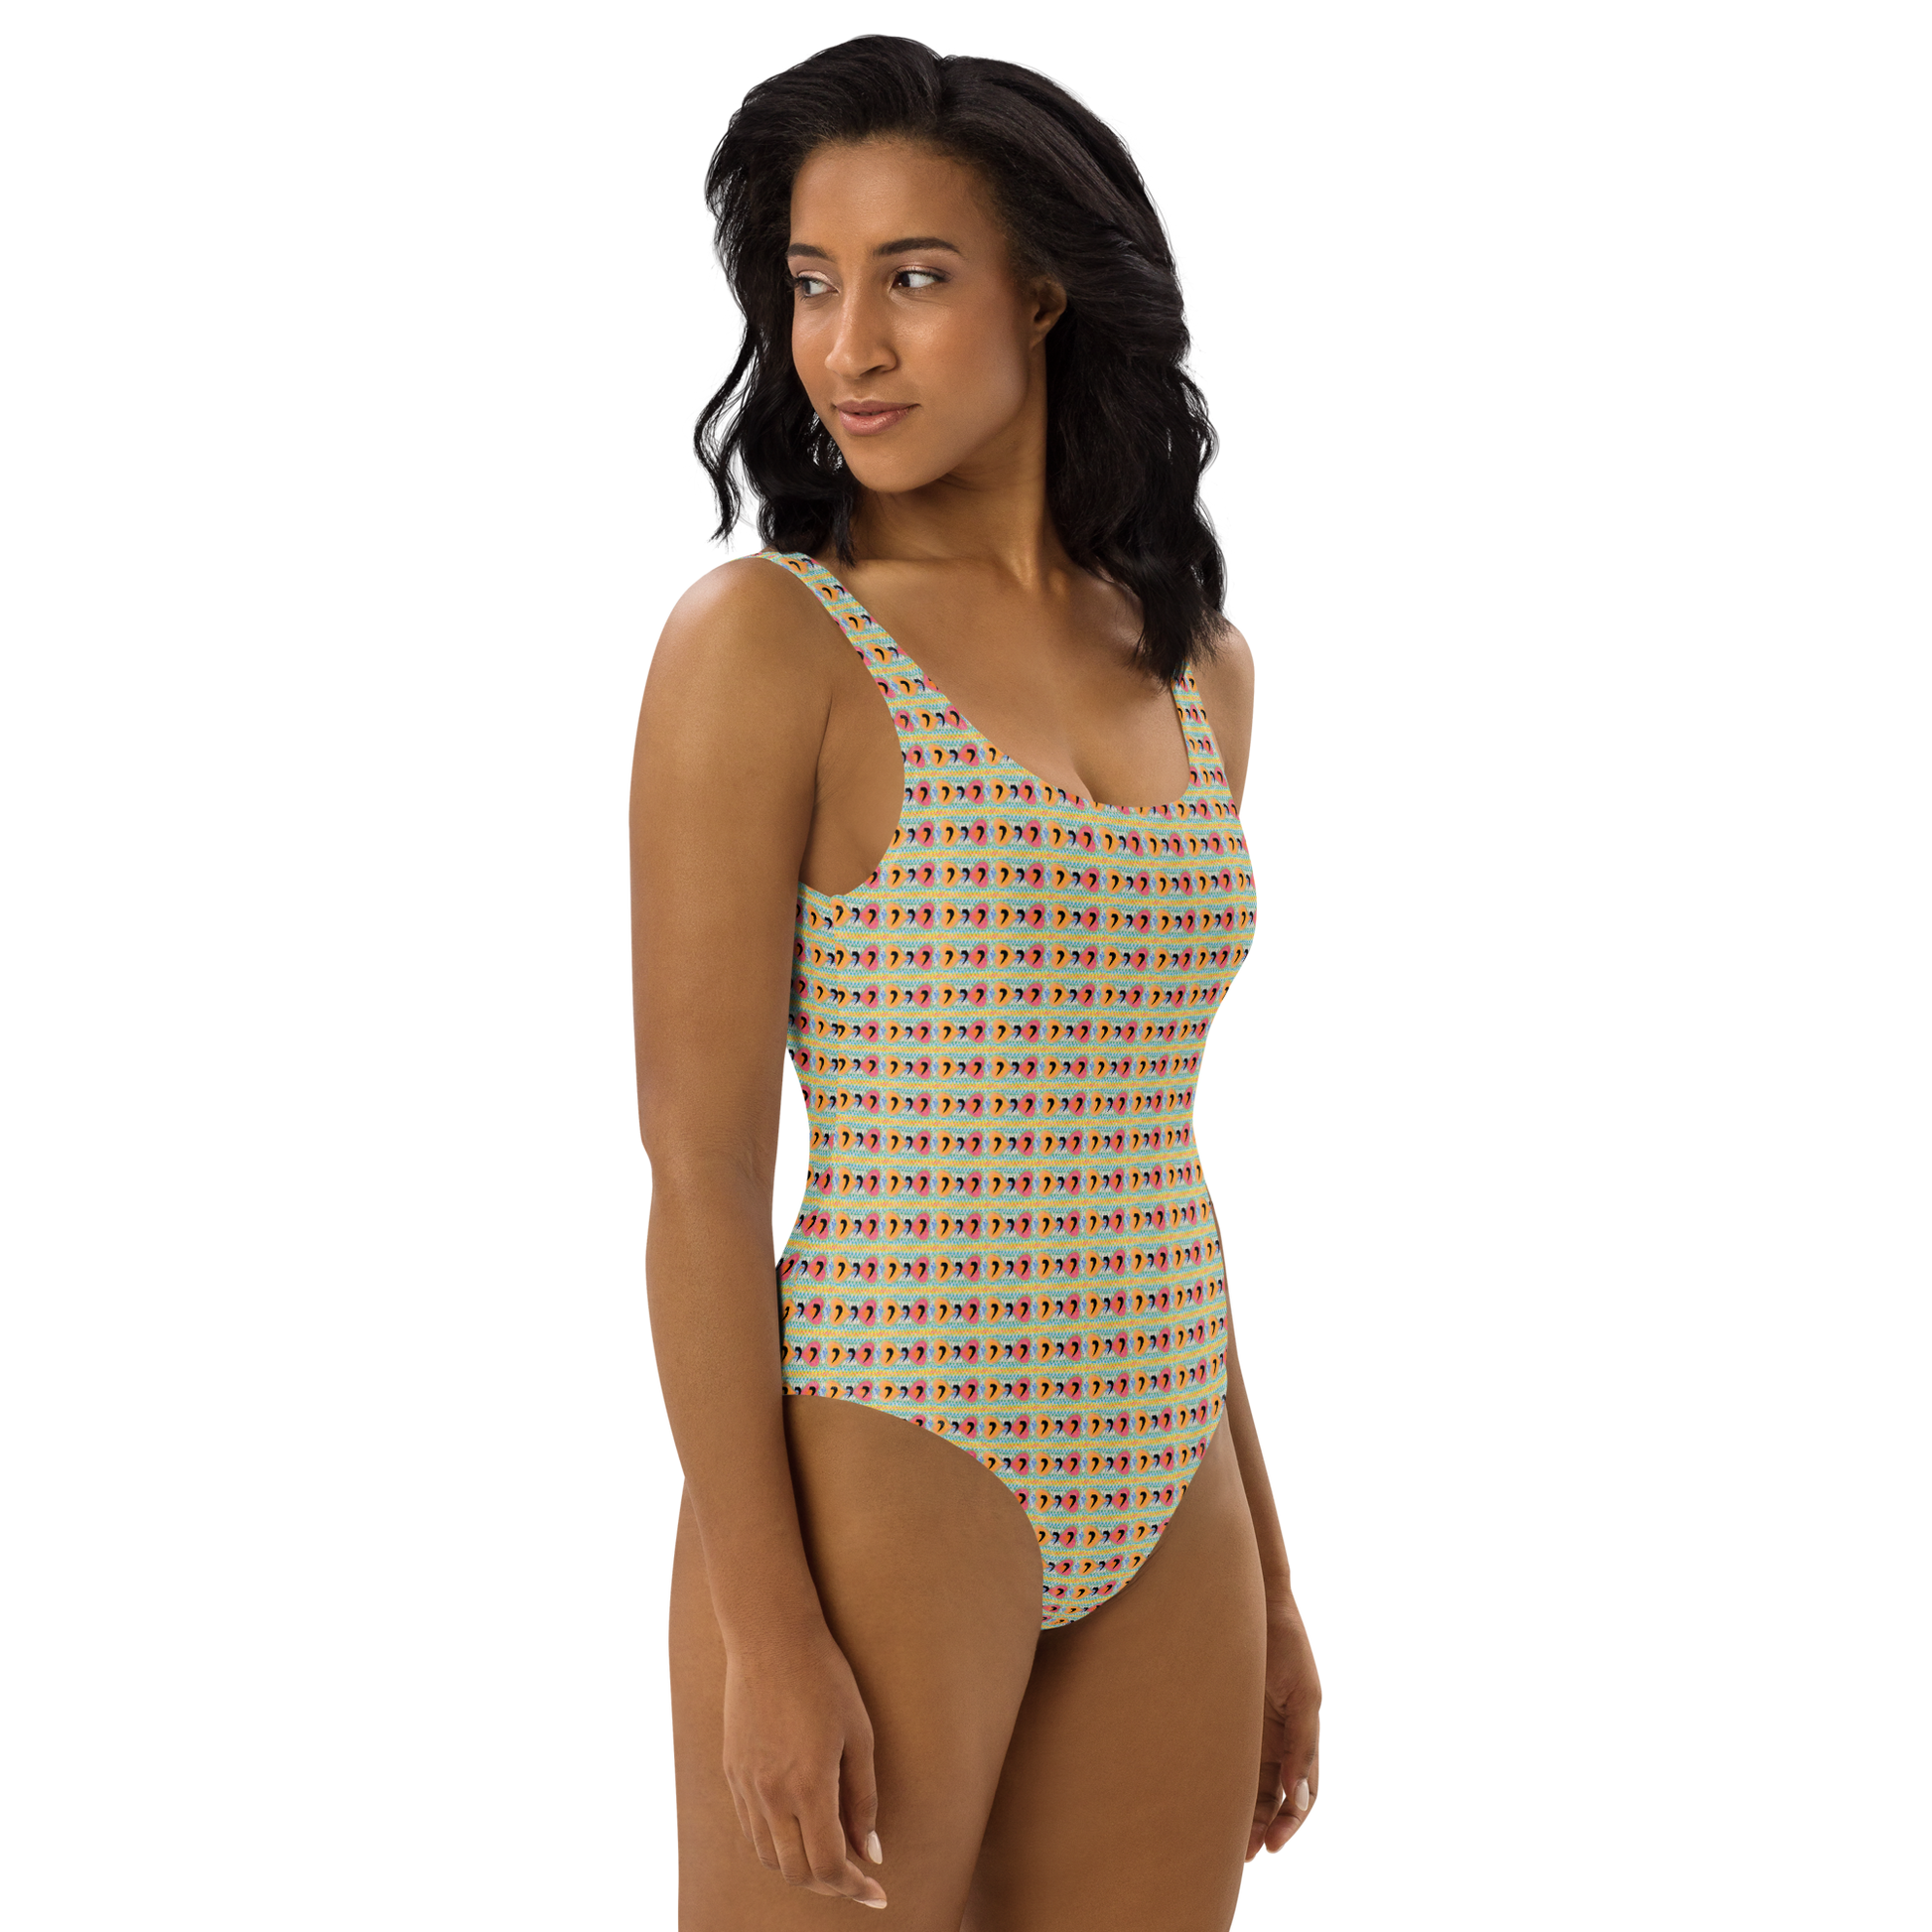  One-Piece-Swimsuit-Promote-Healthy-Relationships-(72-Names-of-God-Yud-Yud-Yud)-11-137online.com